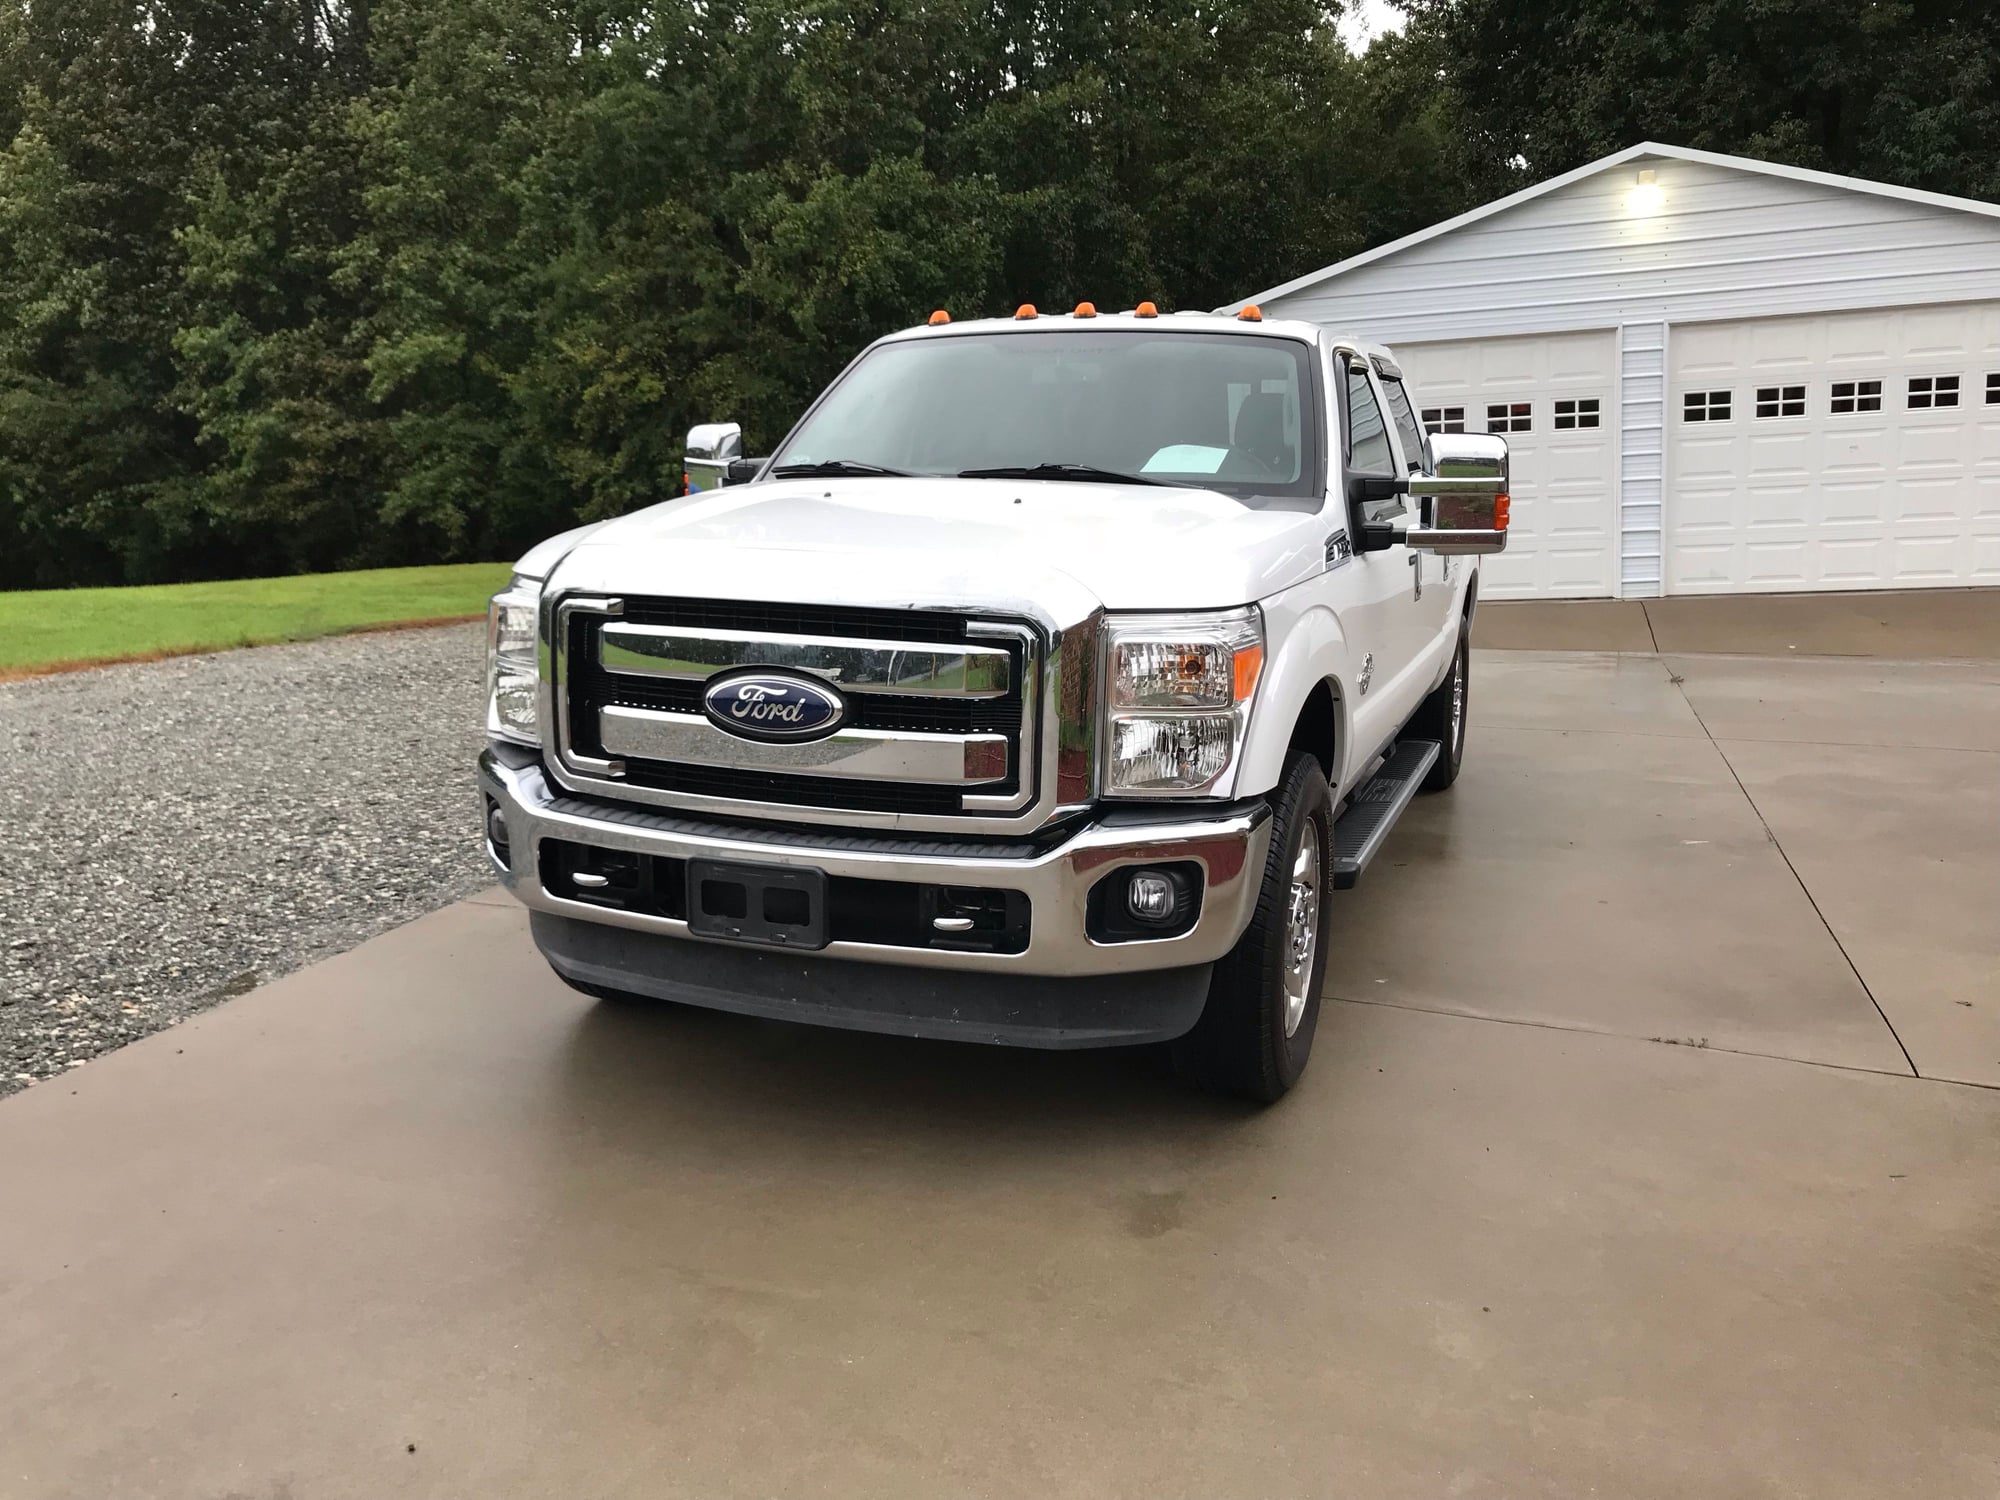 2011 Ford F-250 Super Duty - 2011 F250 Superduty XLT 6.7 diesel 66,000 miles! - Used - VIN 1ft7w2bt4bec39010 - 66,265 Miles - 8 cyl - 4WD - Automatic - Truck - White - Climax, NC 27233, United States